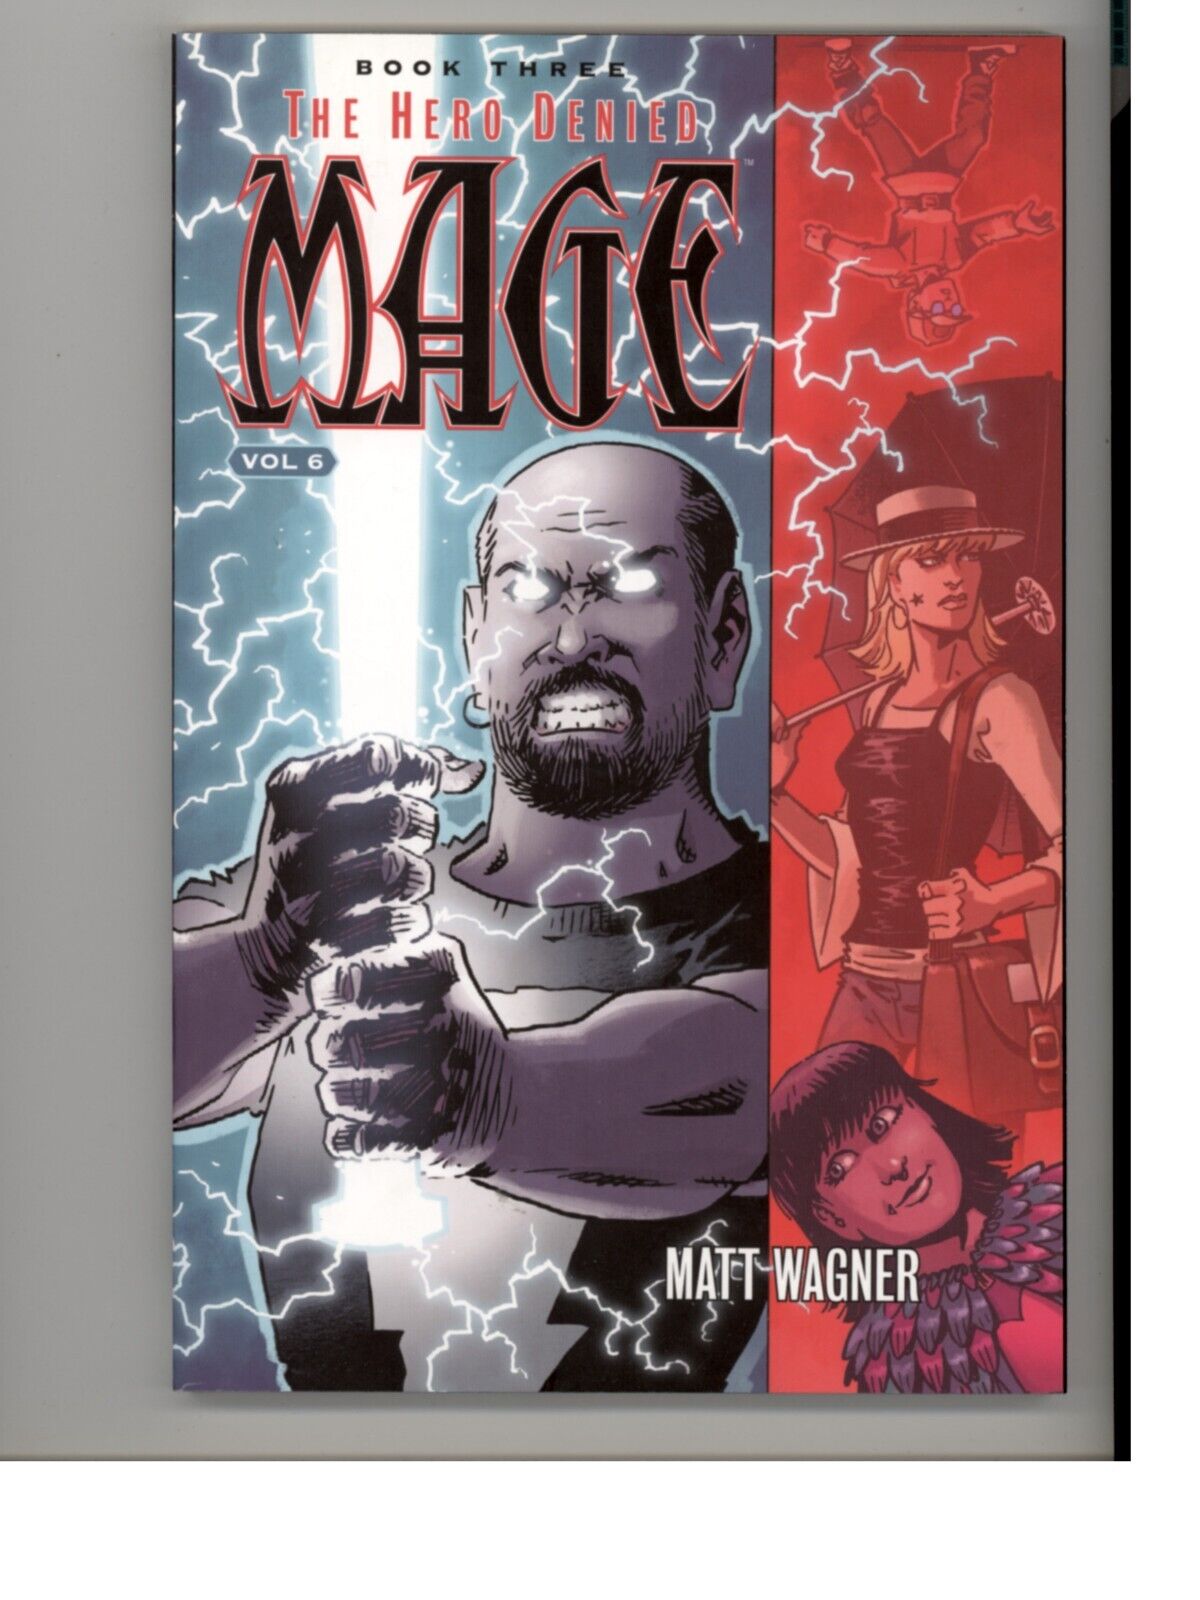 Mage, Book Three: the Hero Denied Vol 6 Image NEW Never Read TPB